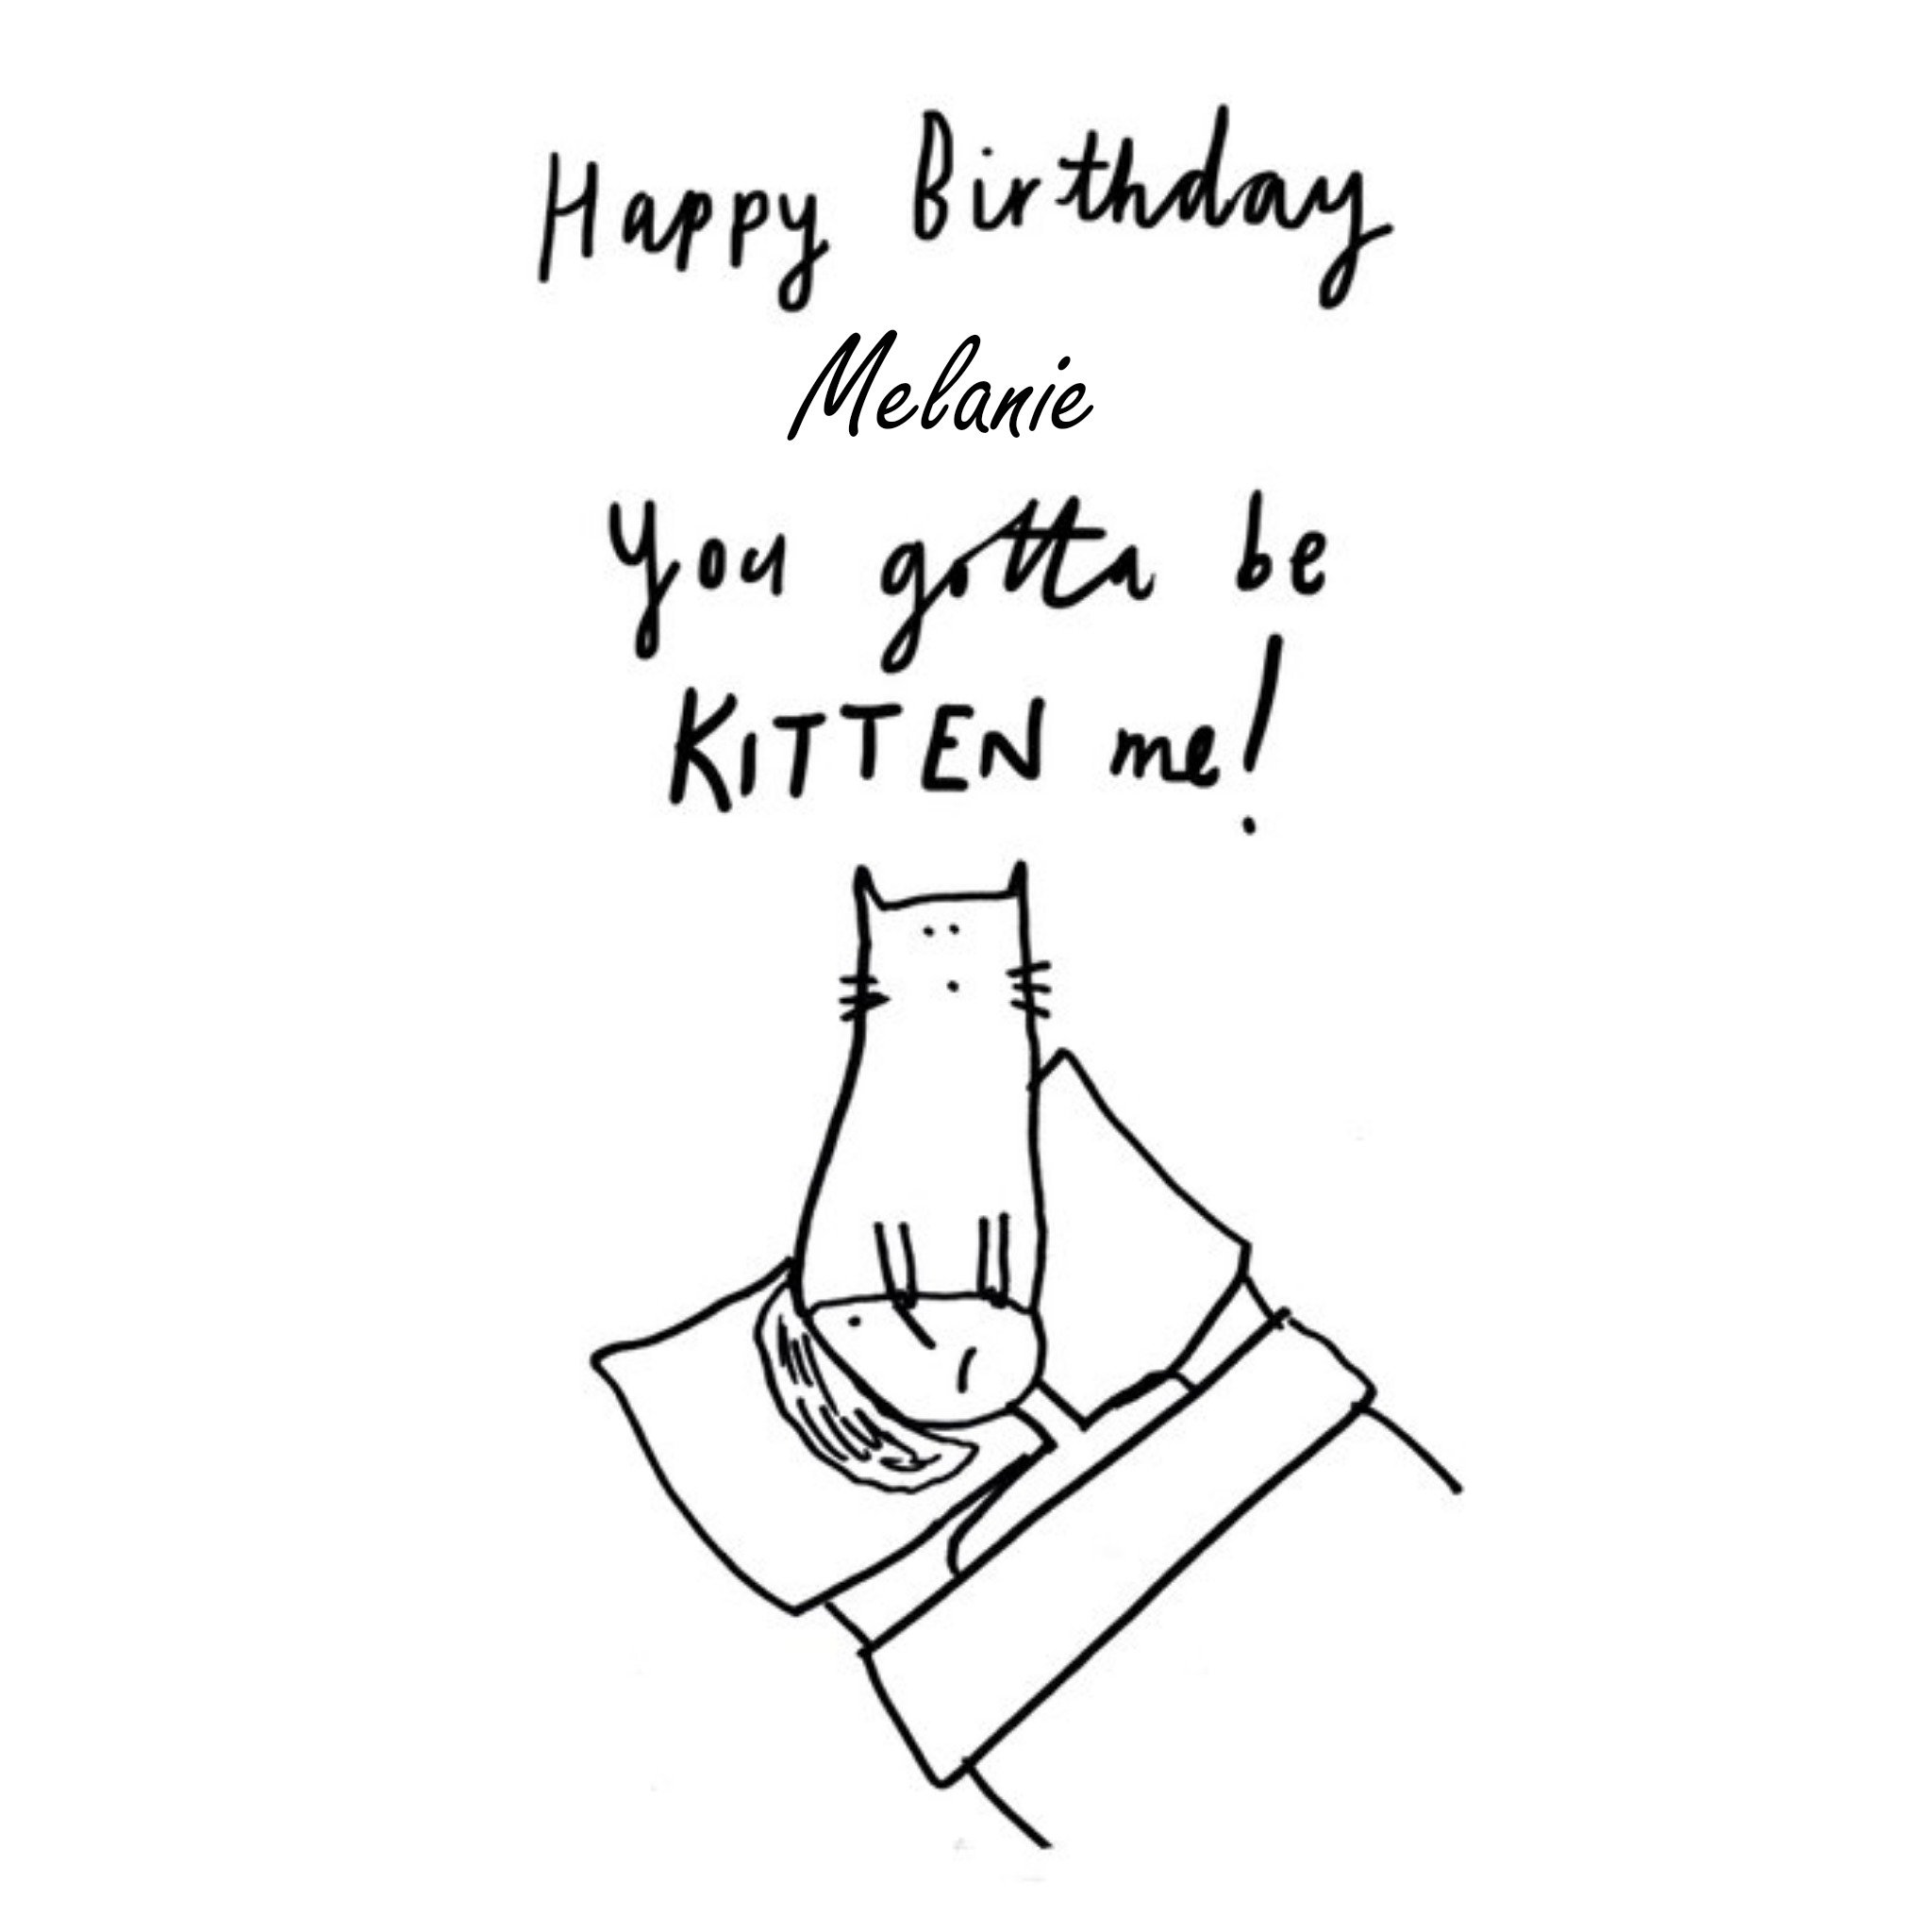 Moonpig You Gotta Be Kitten Me Personalised Happy Birthday Card, Large